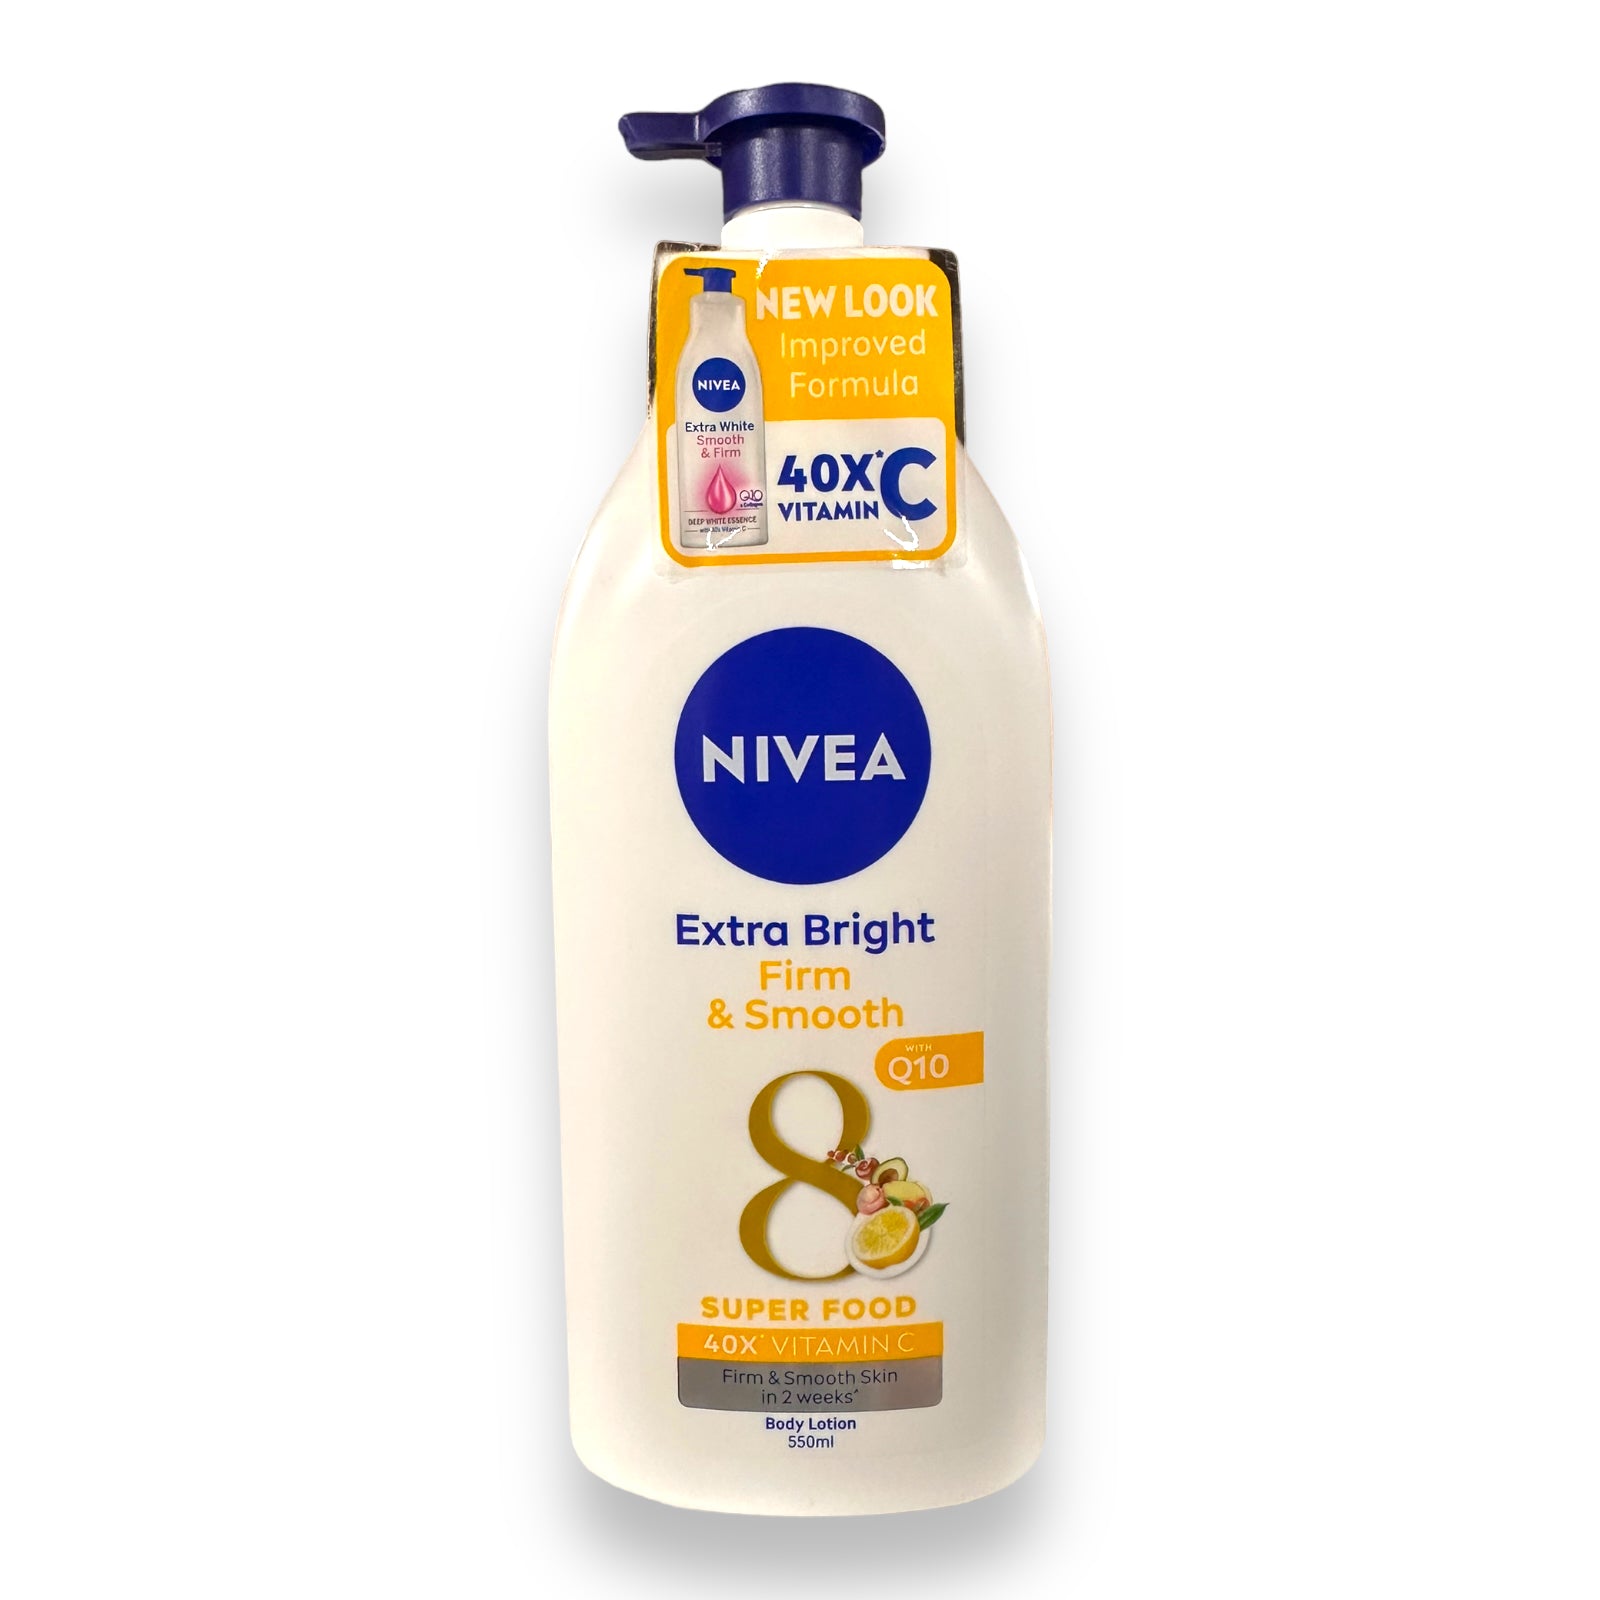 Nivea Extra Bright  - Firm & Smooth with Q10 - 8 Super Food 40X Vitamin C - 550 ML ( yellow )